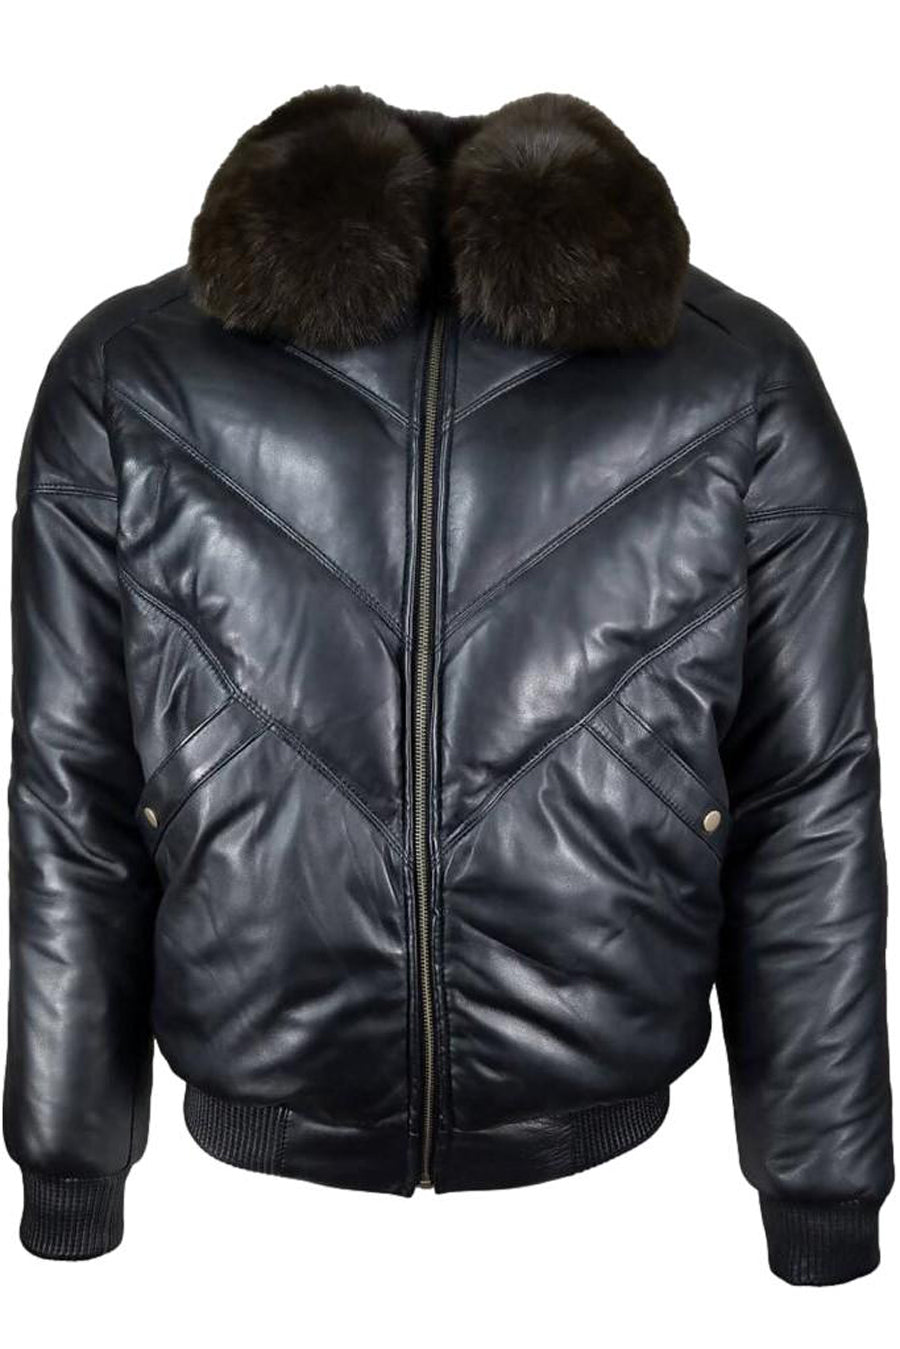 Picture of the front of our Mens Black Leather Bomber Jacket with Fur Collar.